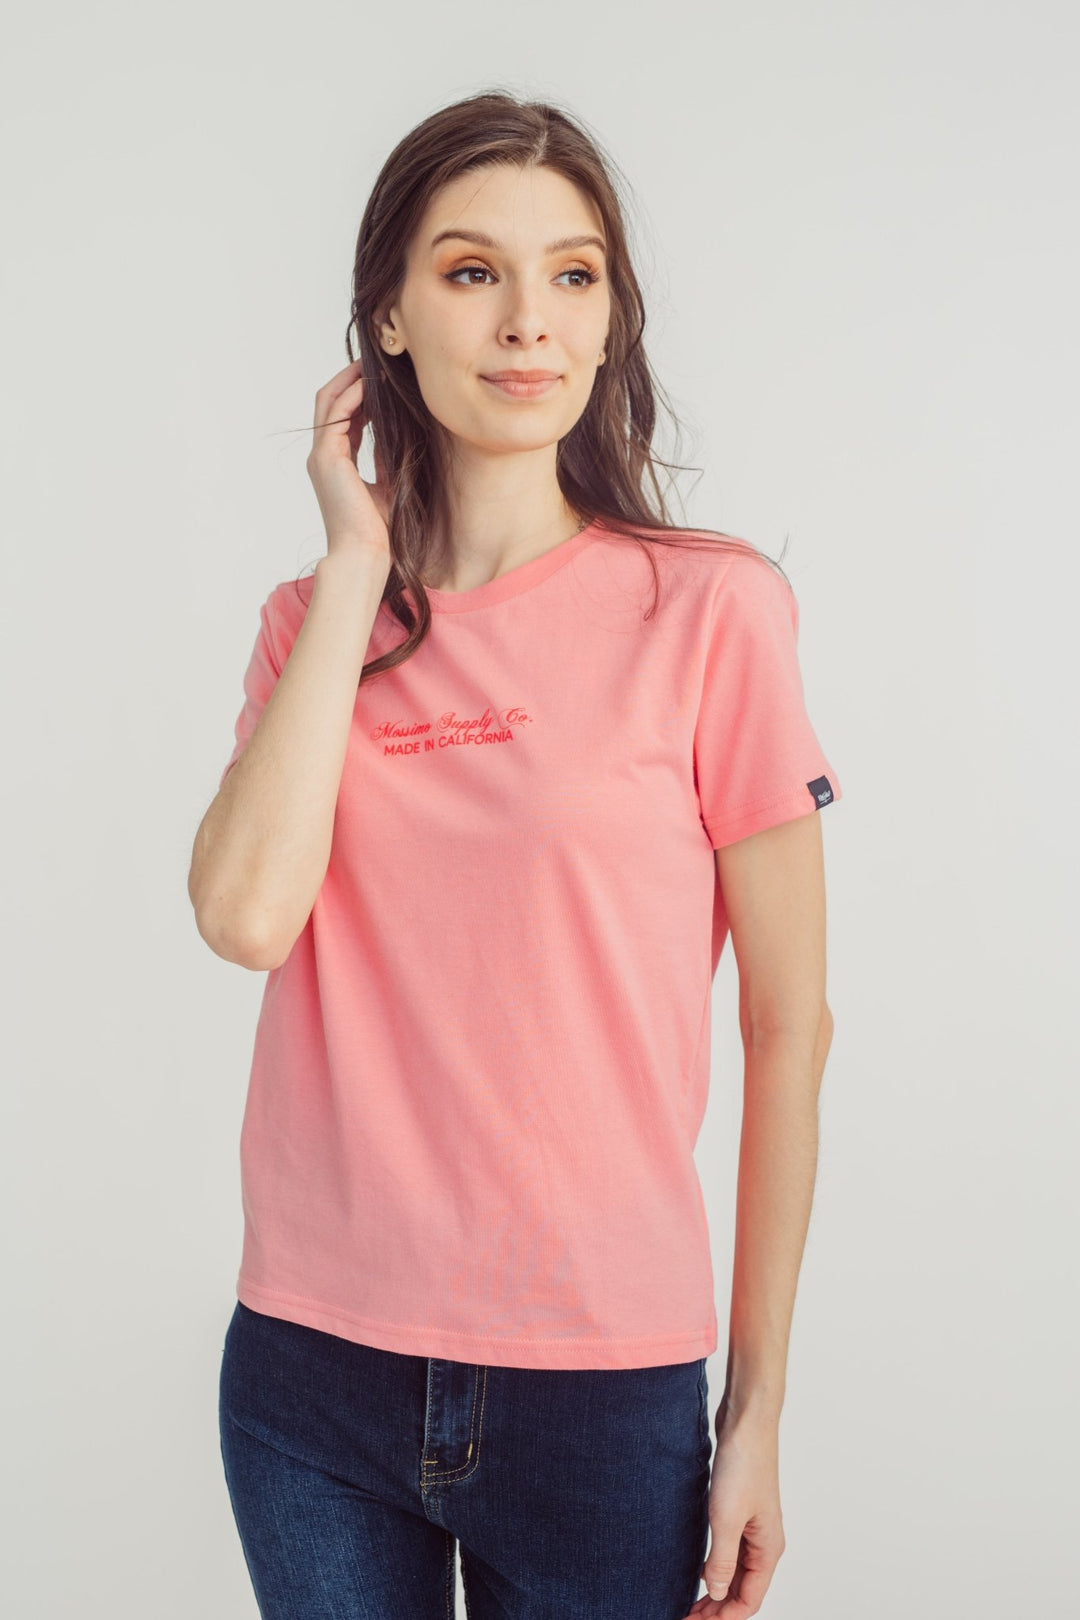 Geranium Pink with Mossimo Supply Co. Made in California Classic Fit Tee - Mossimo PH